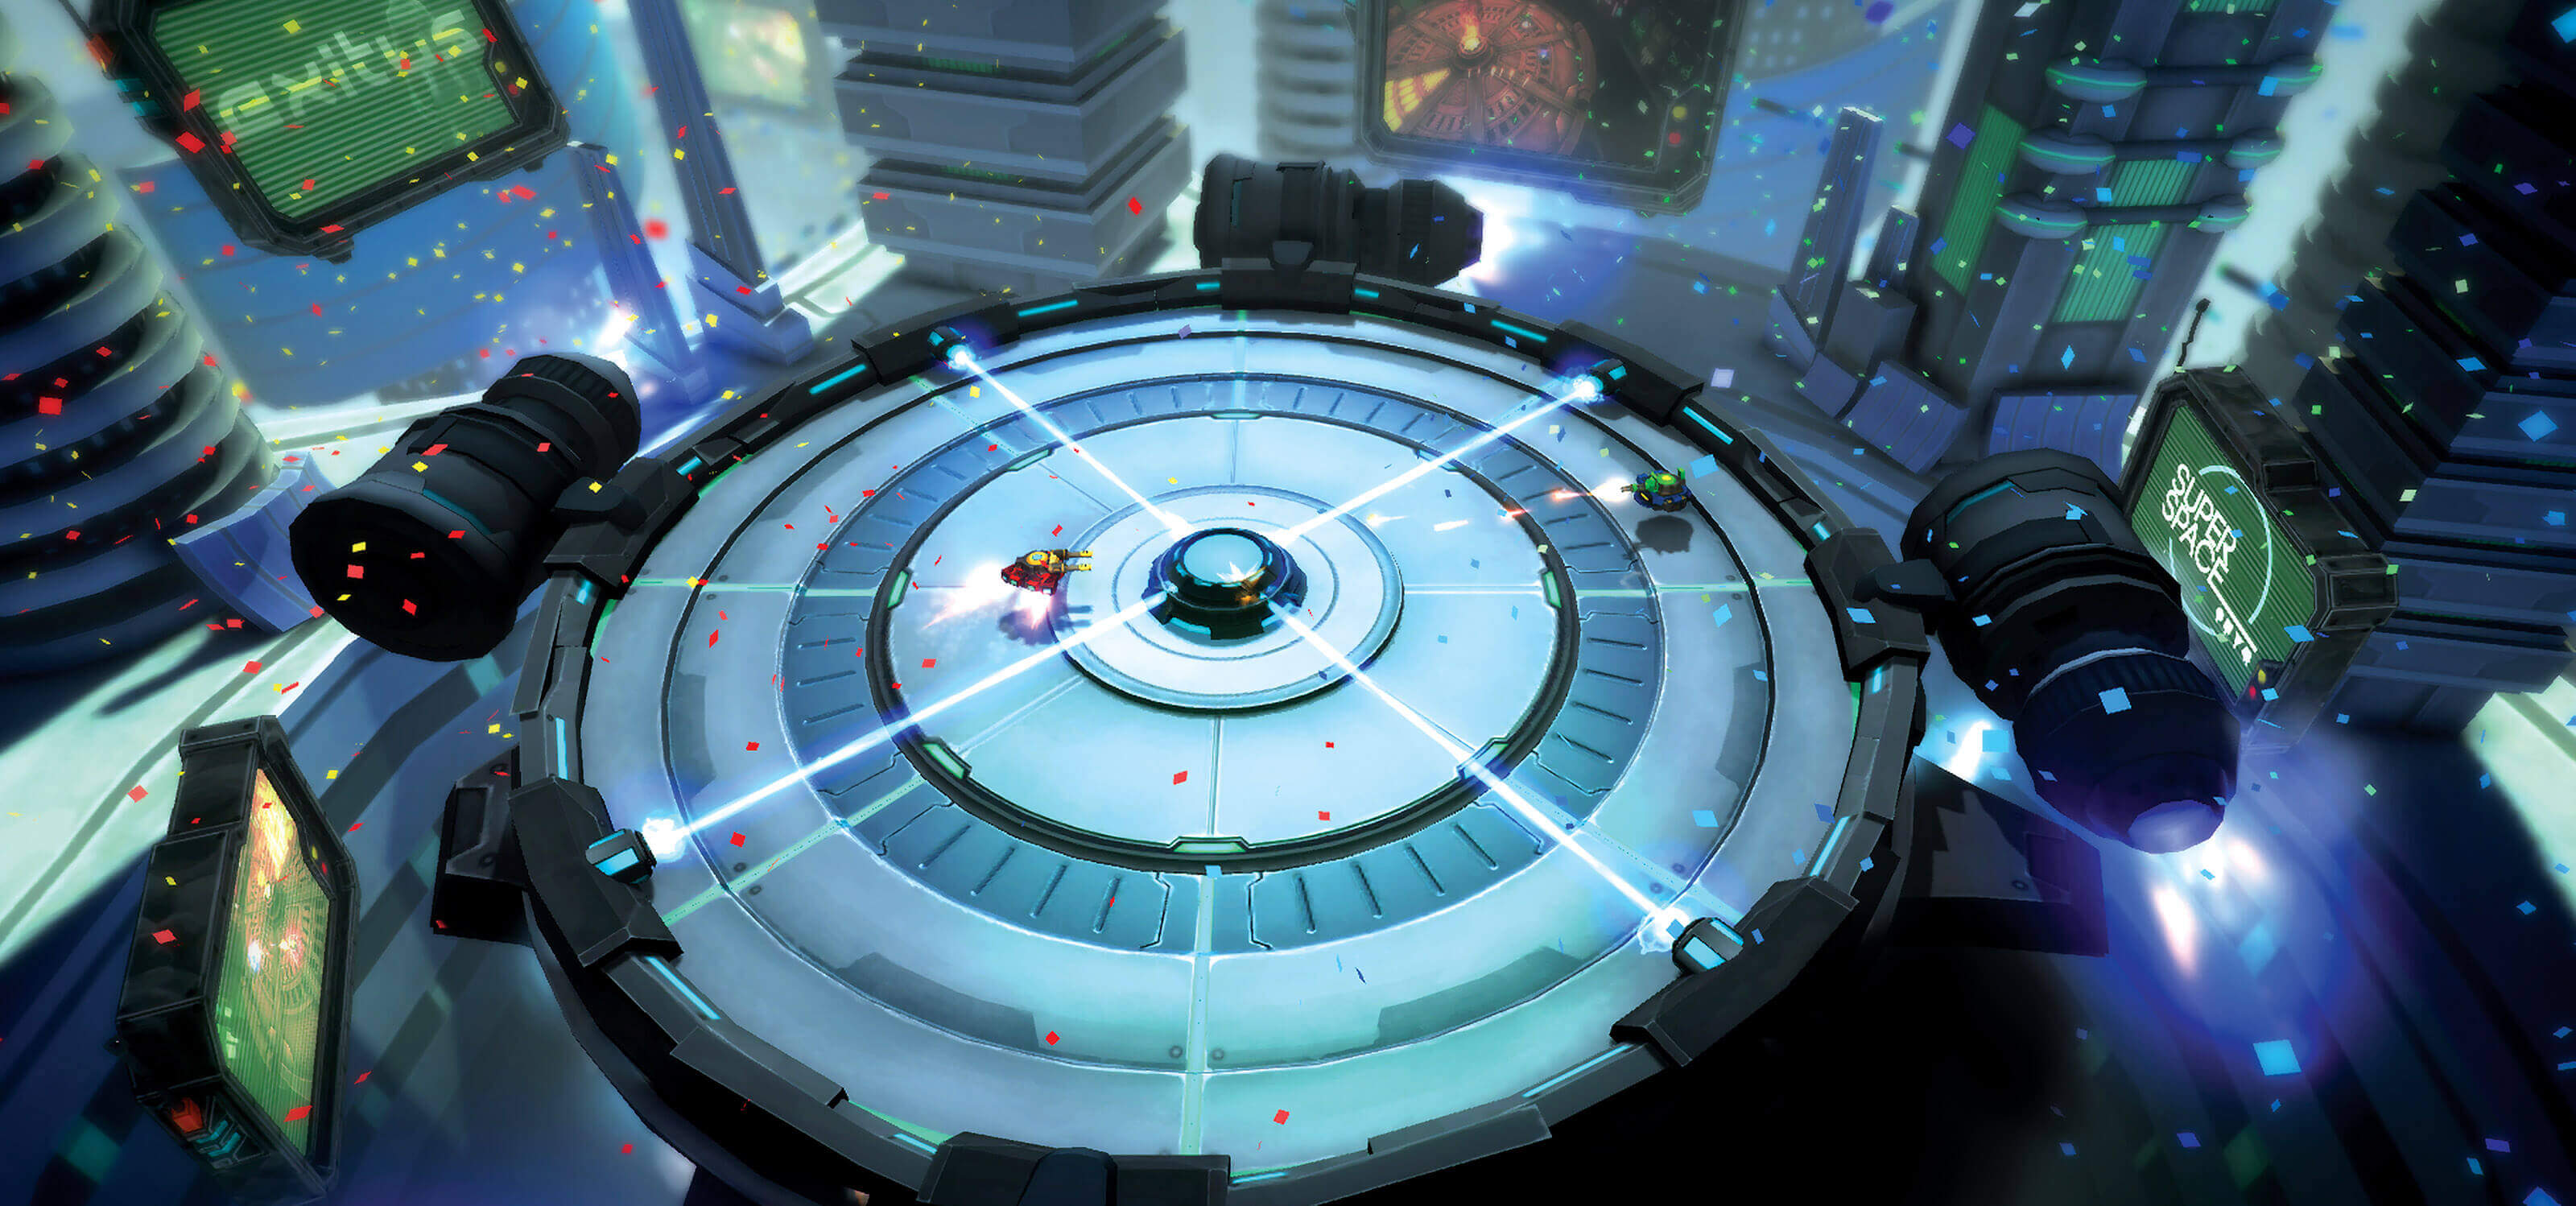 A hover-tank with a yellow machine gun turret and a red base, and another with a green turret and blue base face off in a futuristic arena.